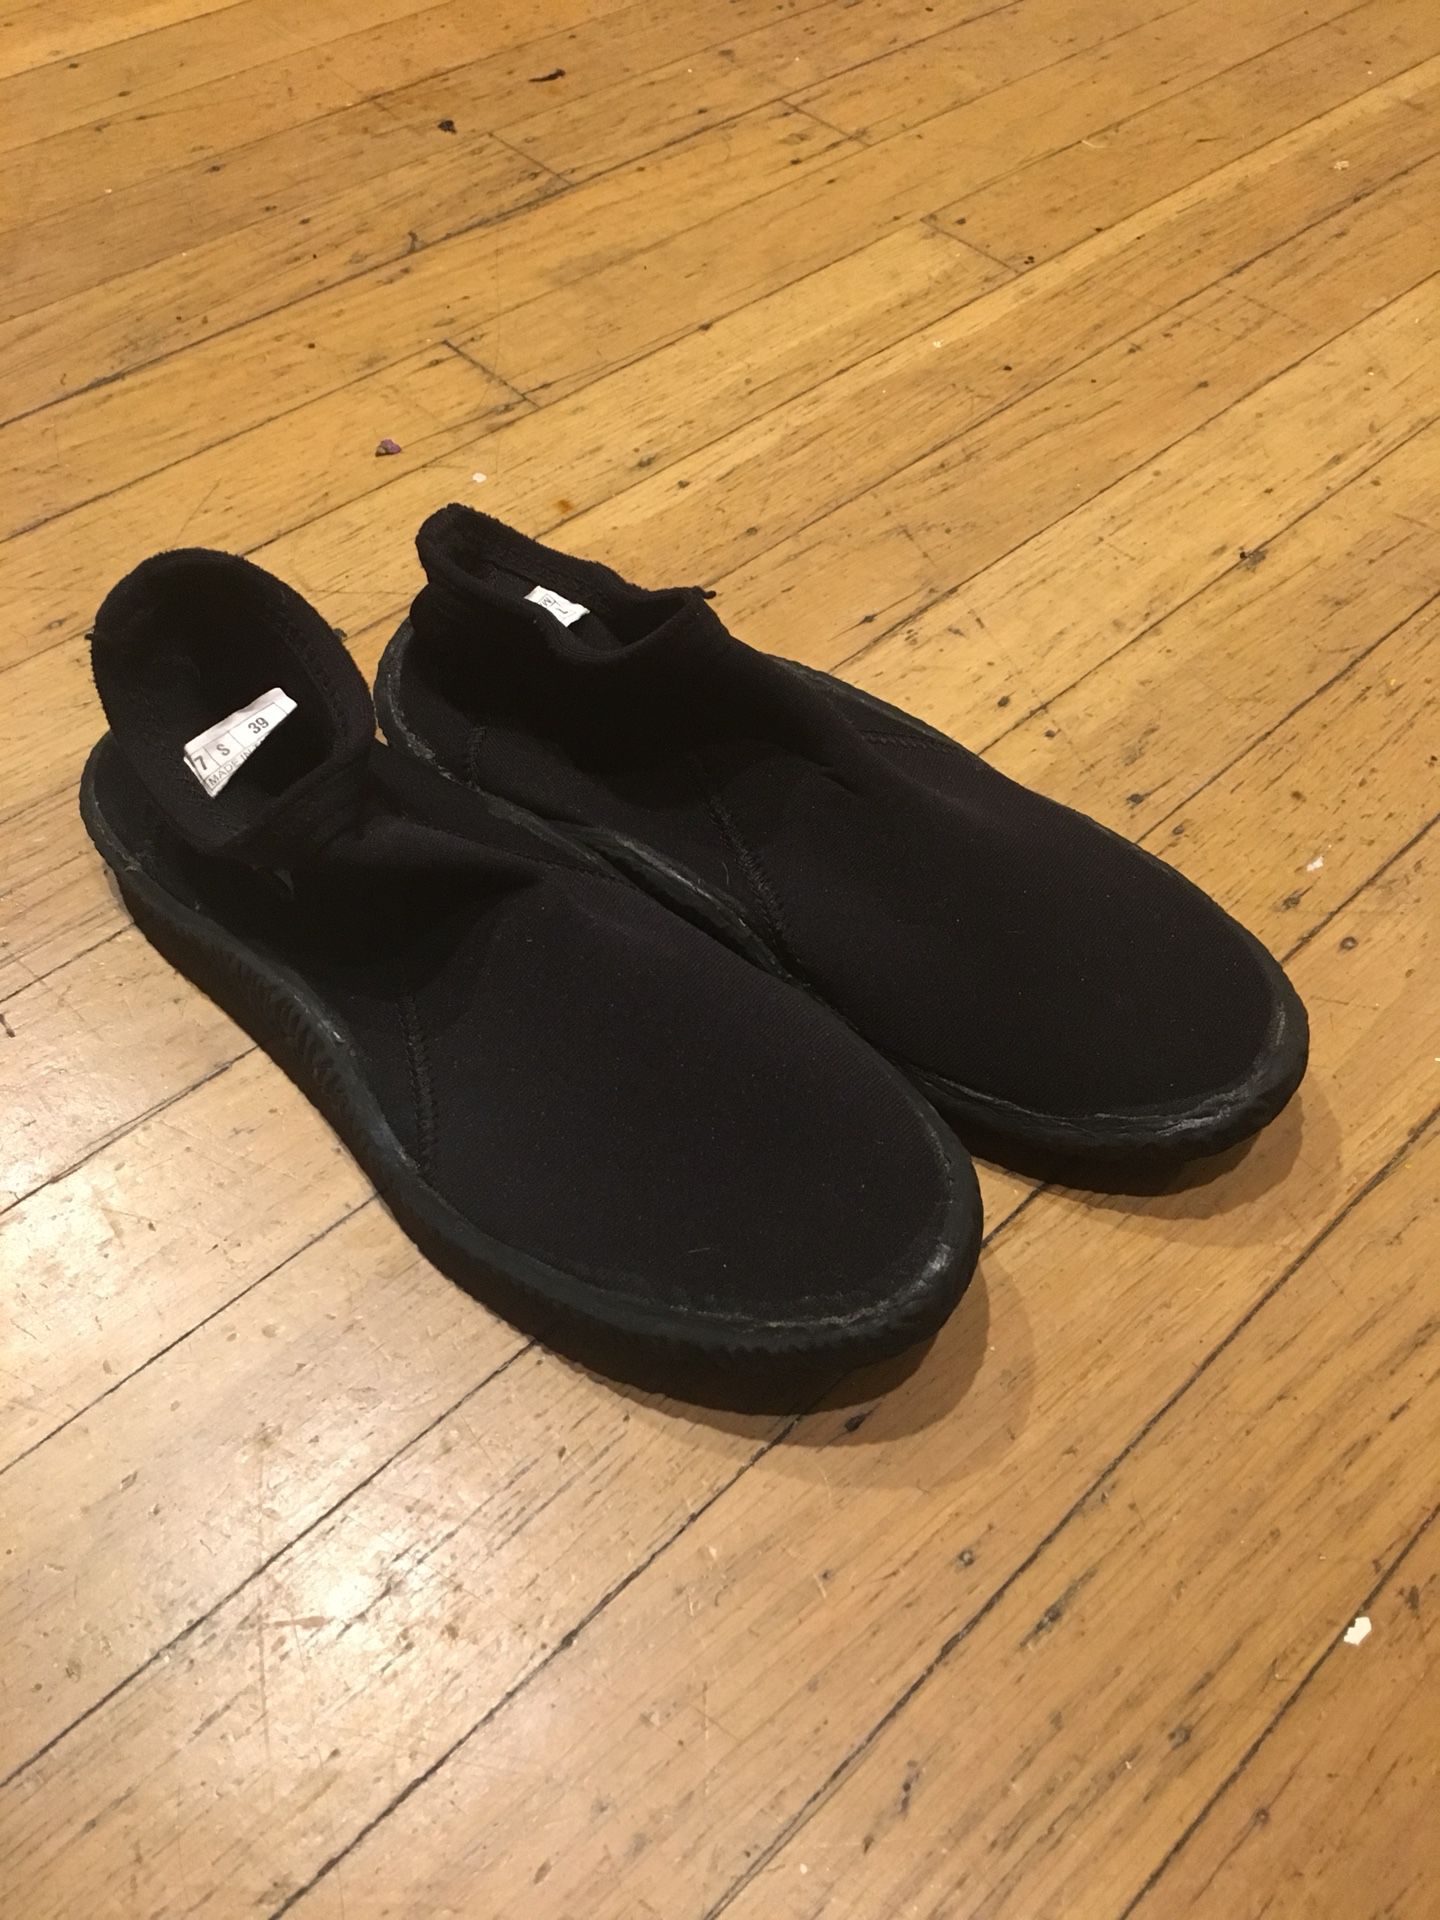 Water shoes - fits size 7.5 women’s